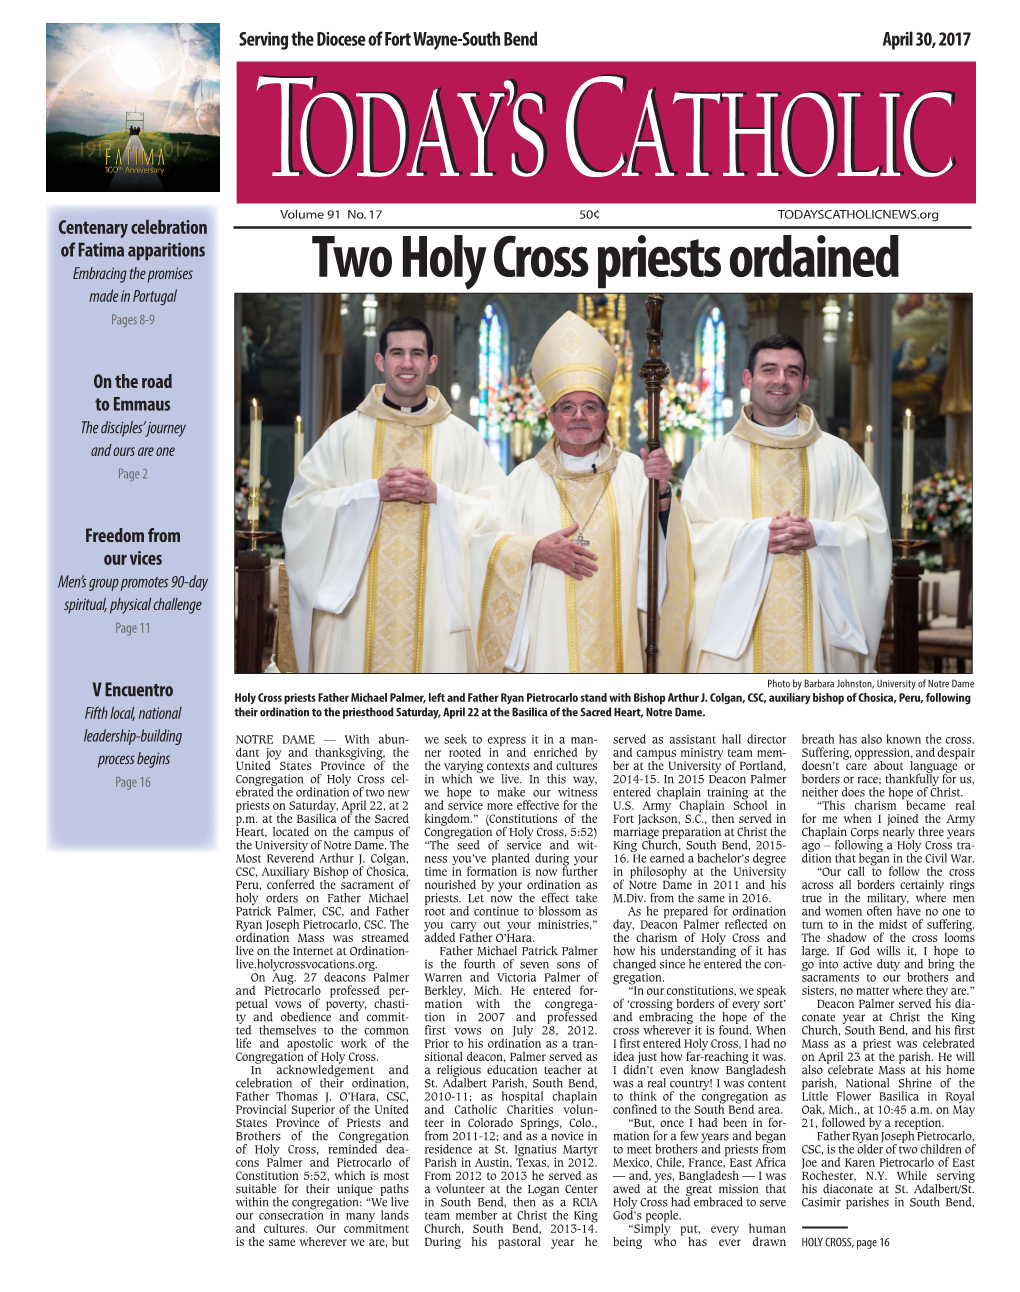 Two Holy Cross Priests Ordained Made in Portugal Pages 8-9